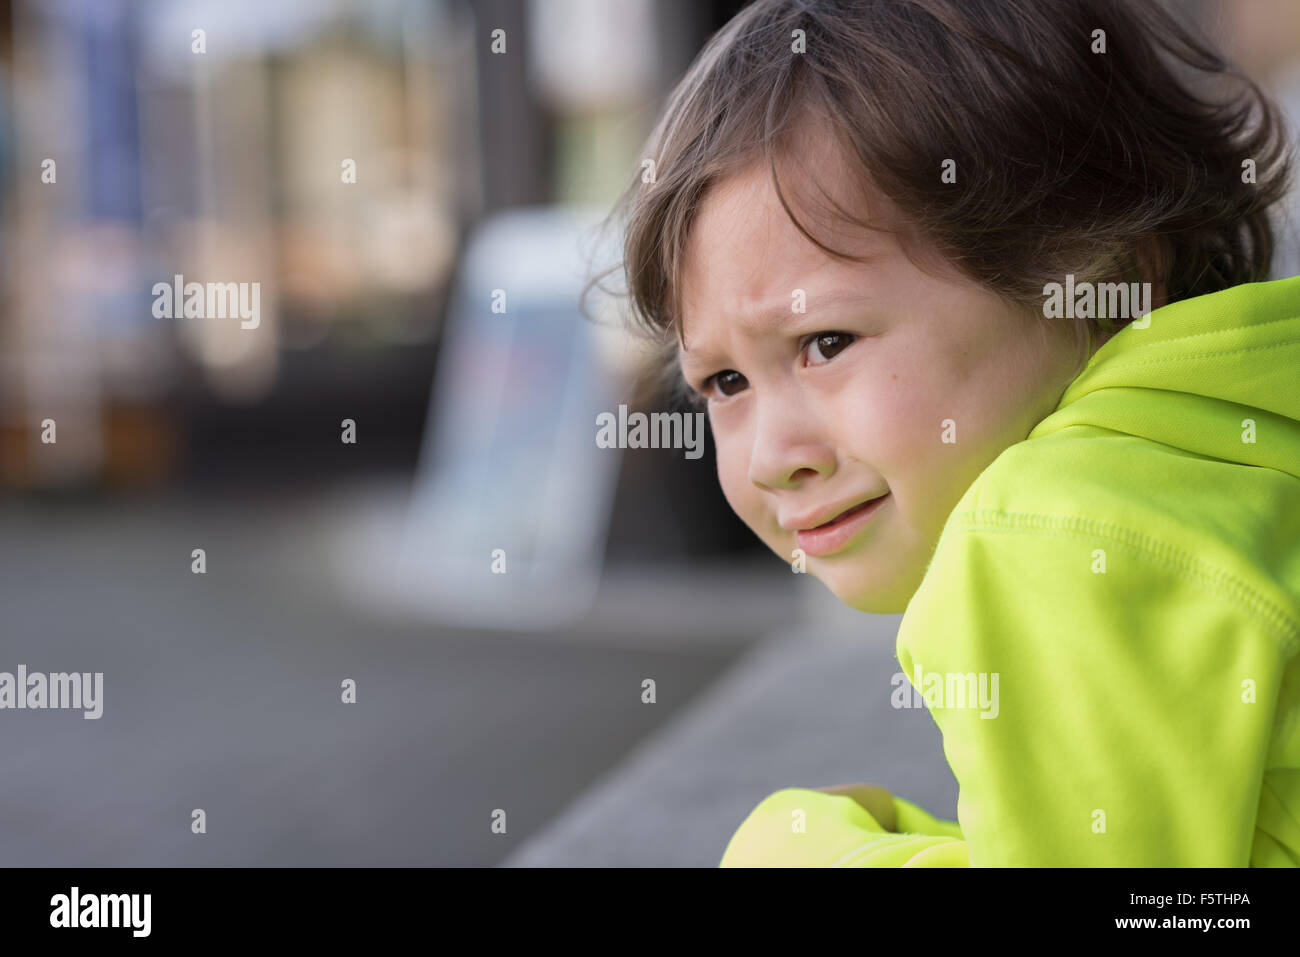 A 3 year old boy with a very upset, stressed expression on his face. Stock Photo